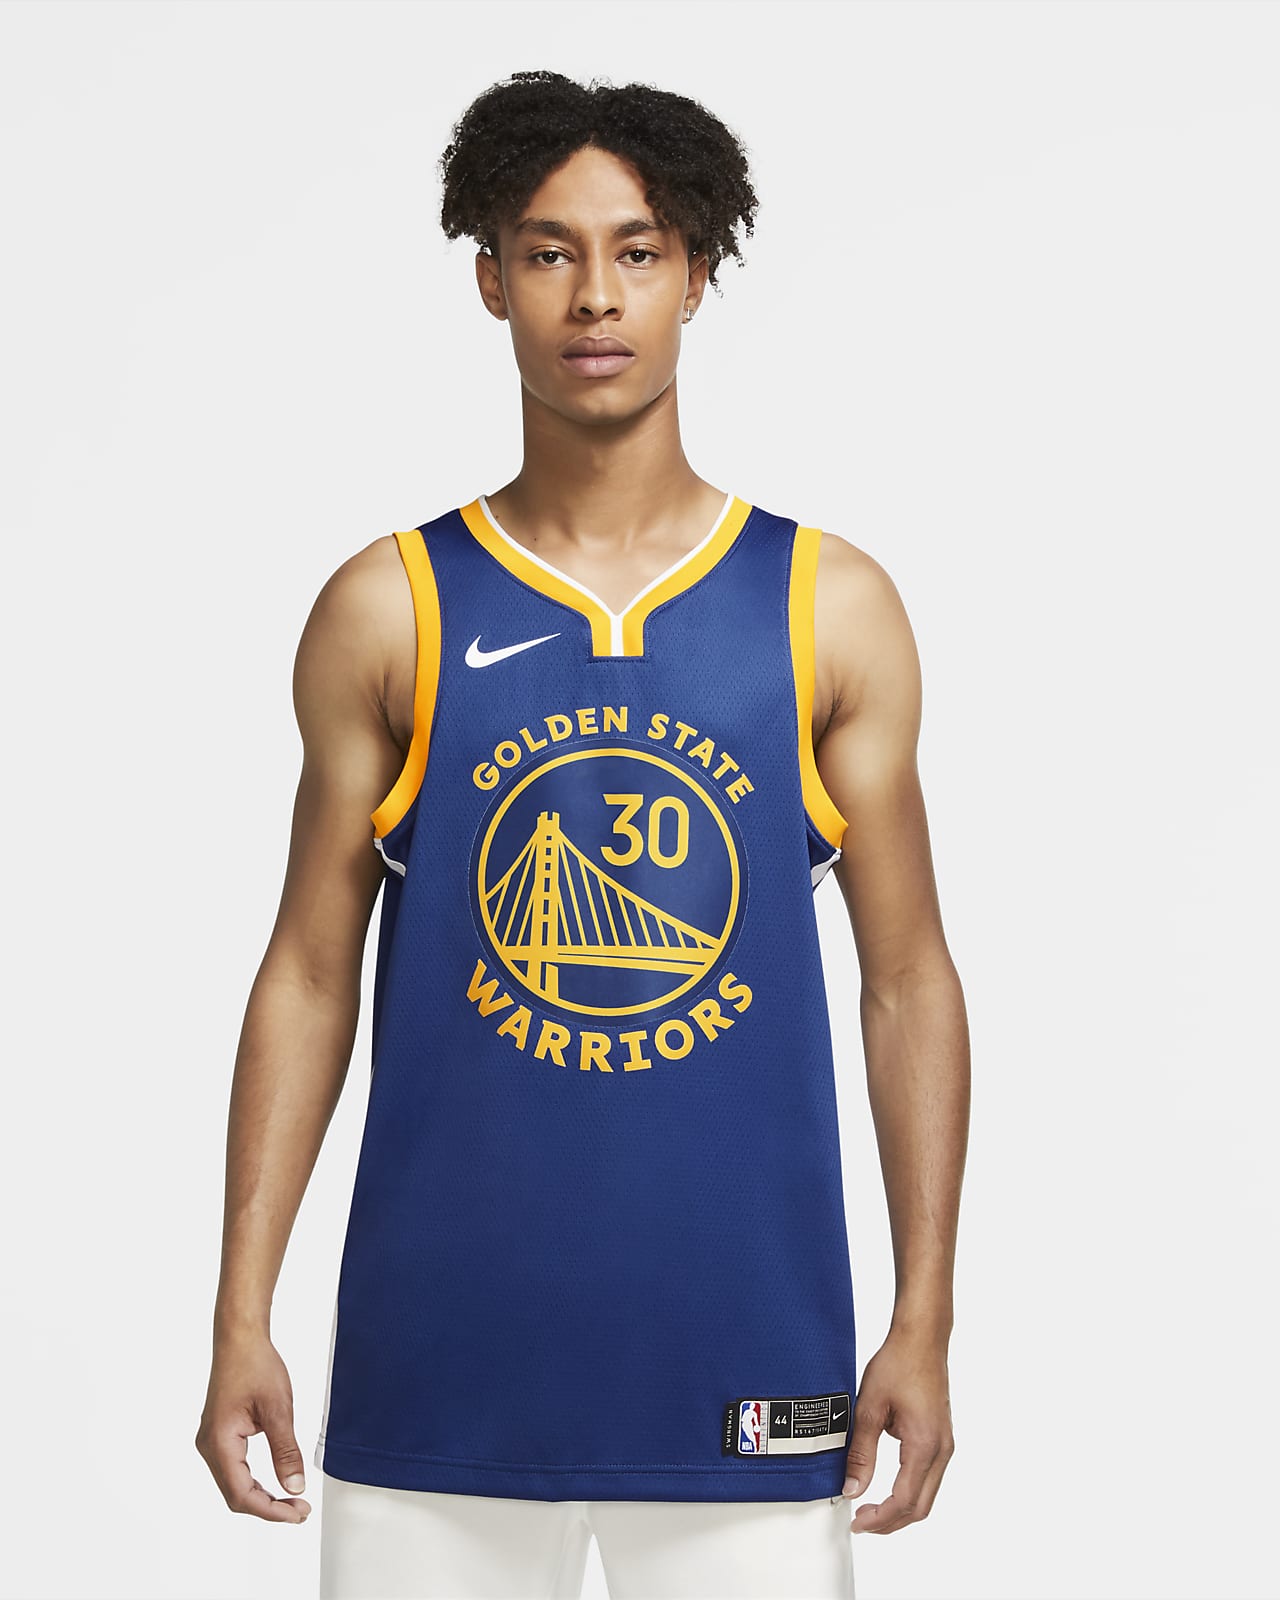 nike stephen curry jersey